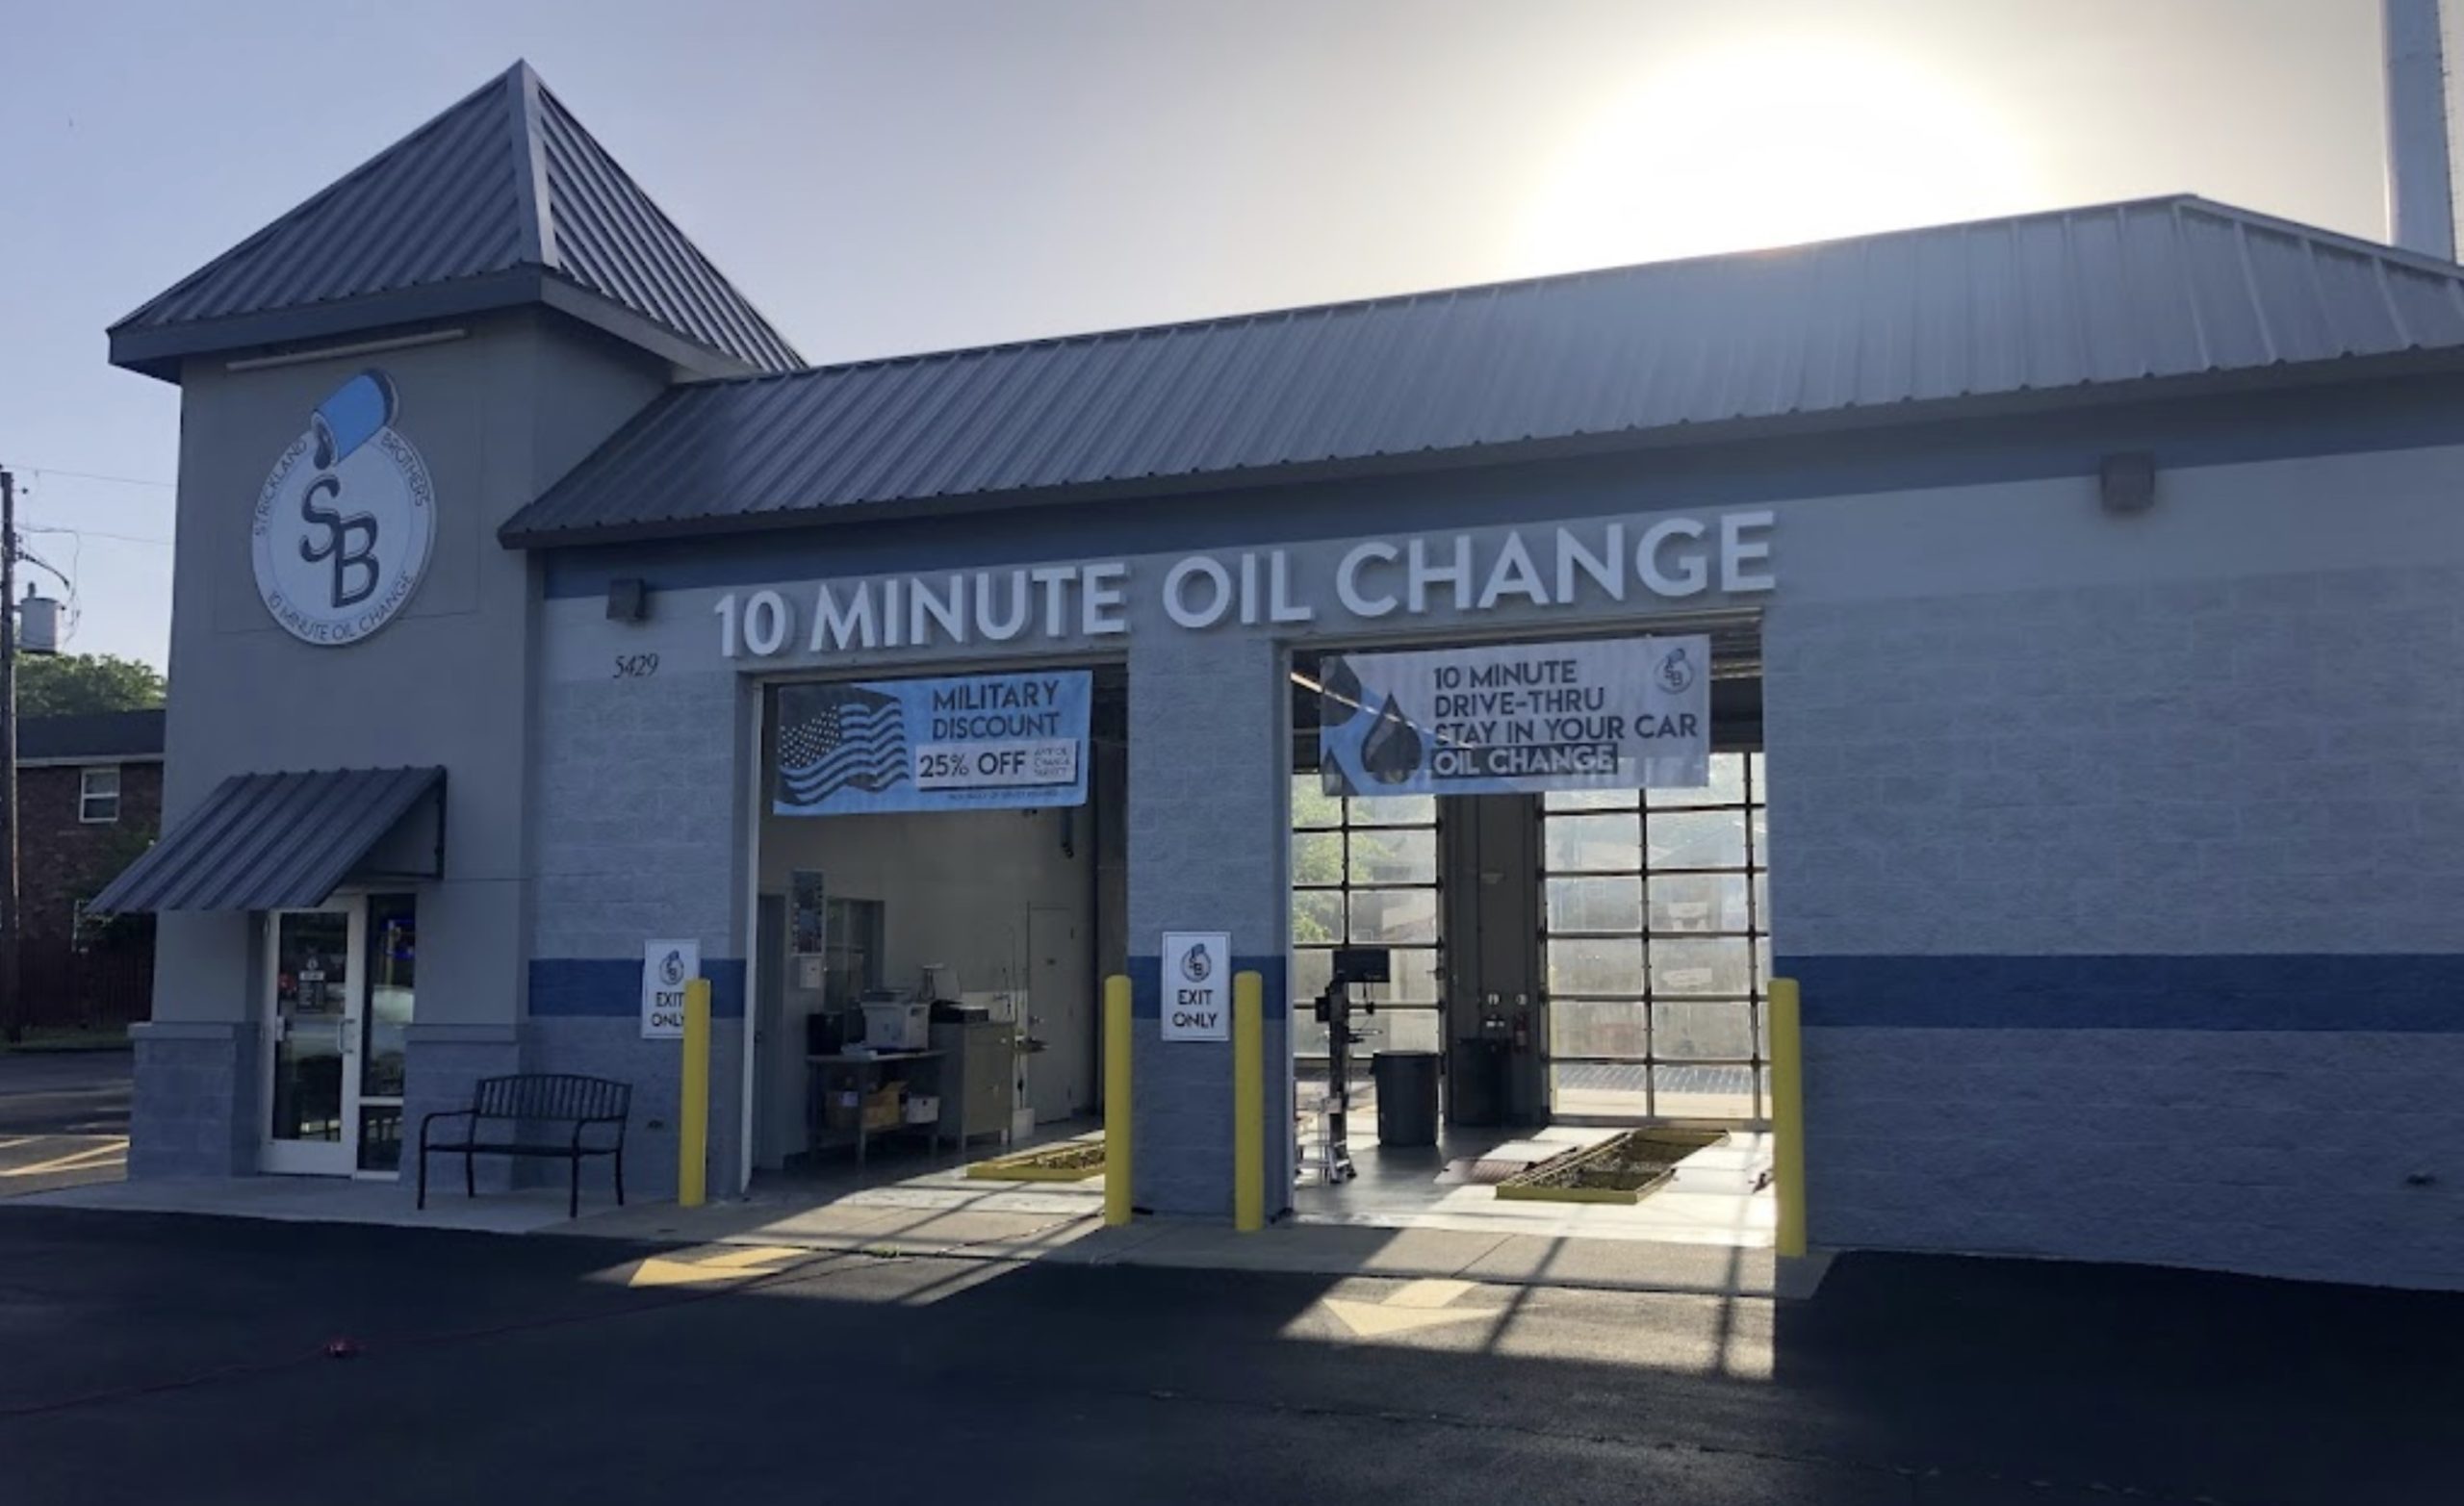 fast-drive-thru-oil-change-louisville-ky-strickland-brothers-10